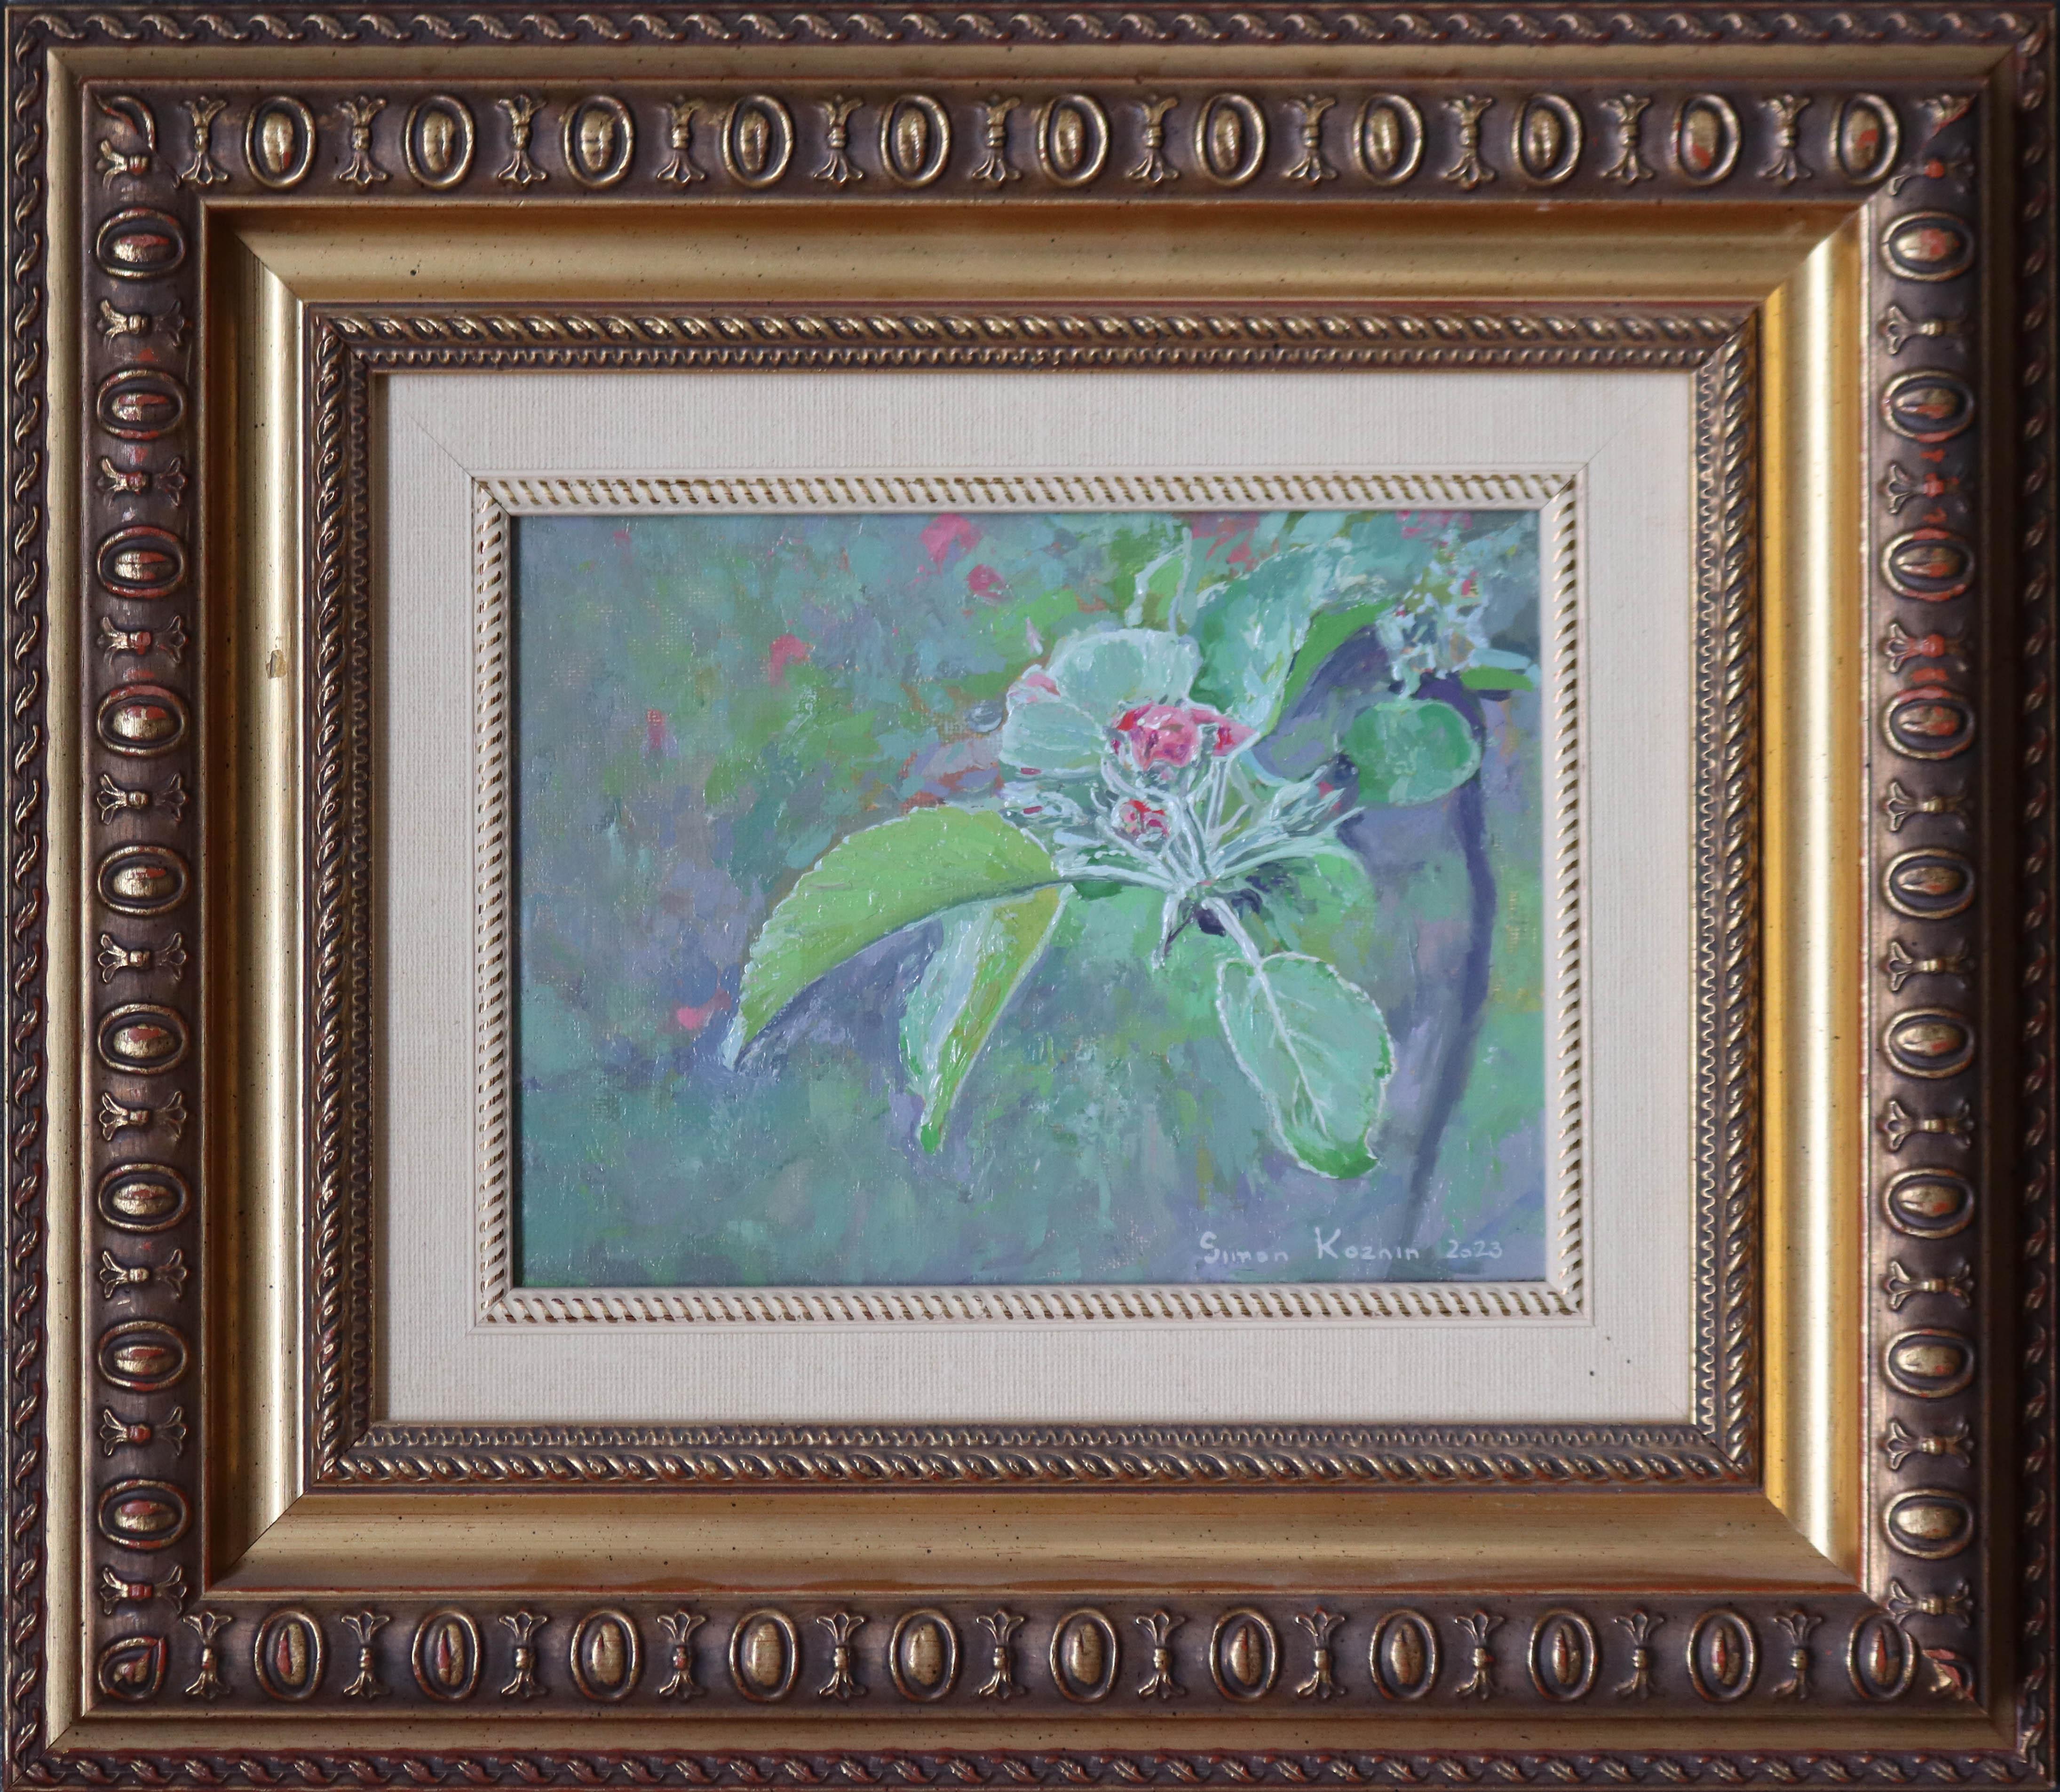 Apple tree buds in bloom - Painting by Simon Kozhin